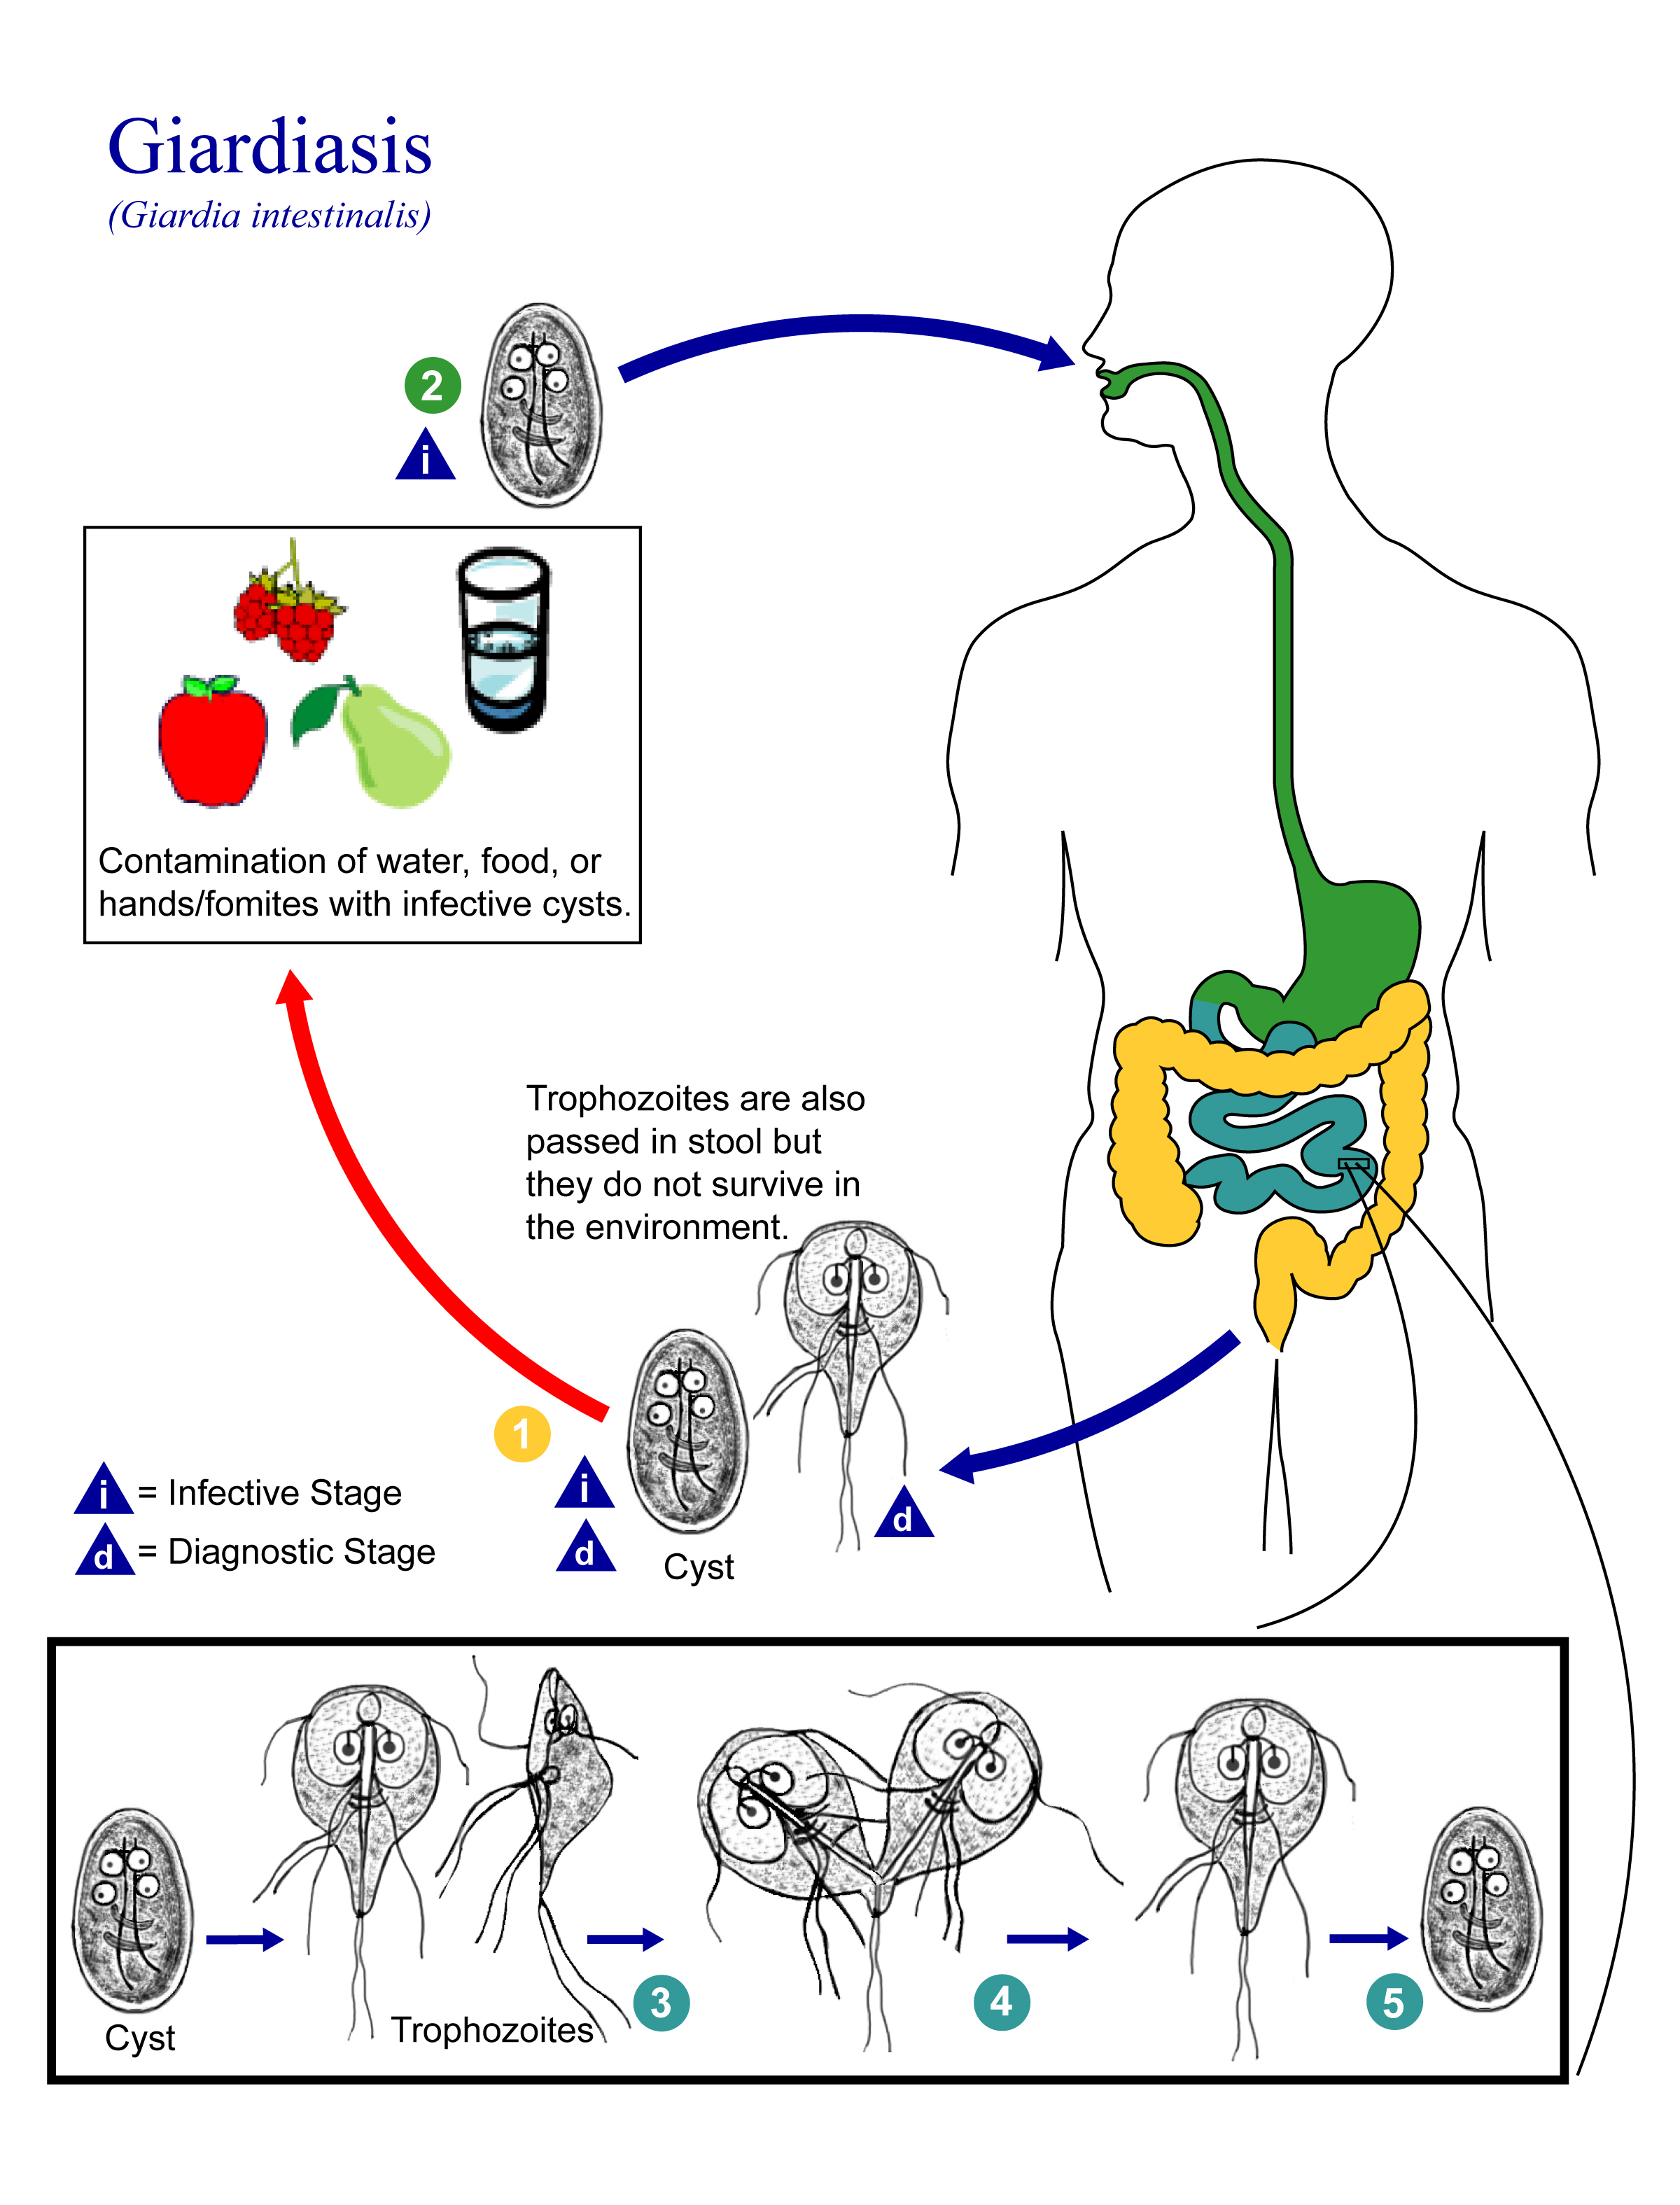 Graphic illustration depicting the Giardiasis cycle in humans